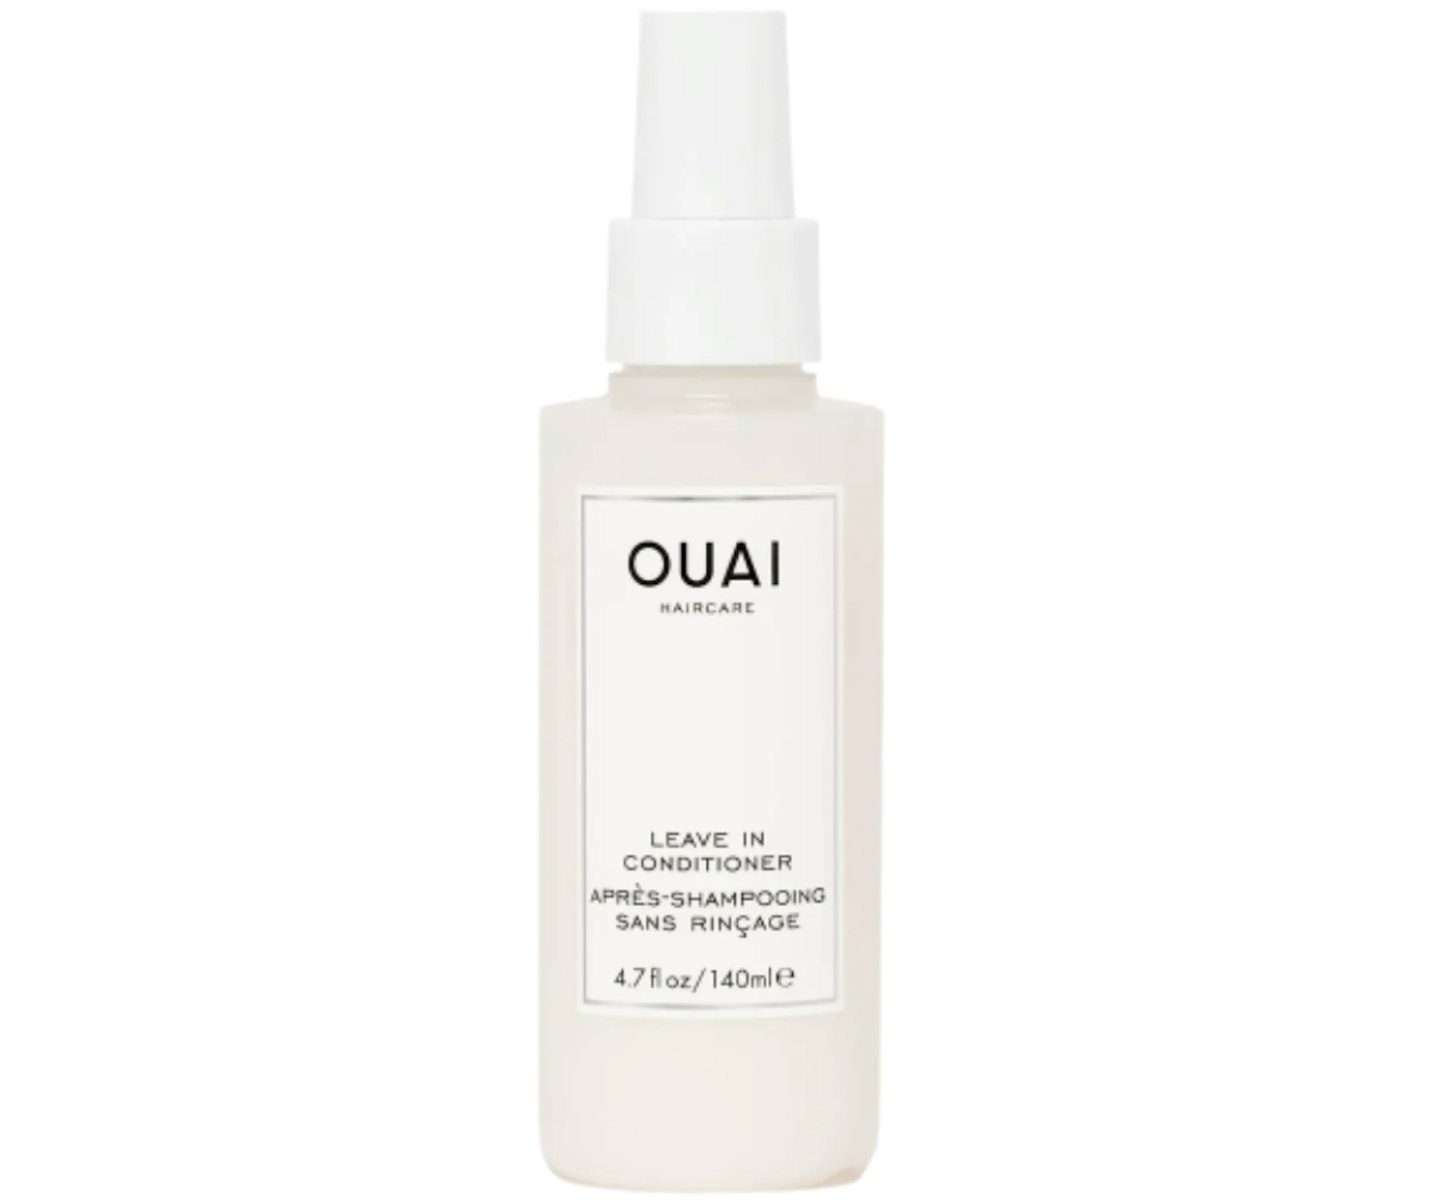 A picture of the OUAI Leave In Conditioner